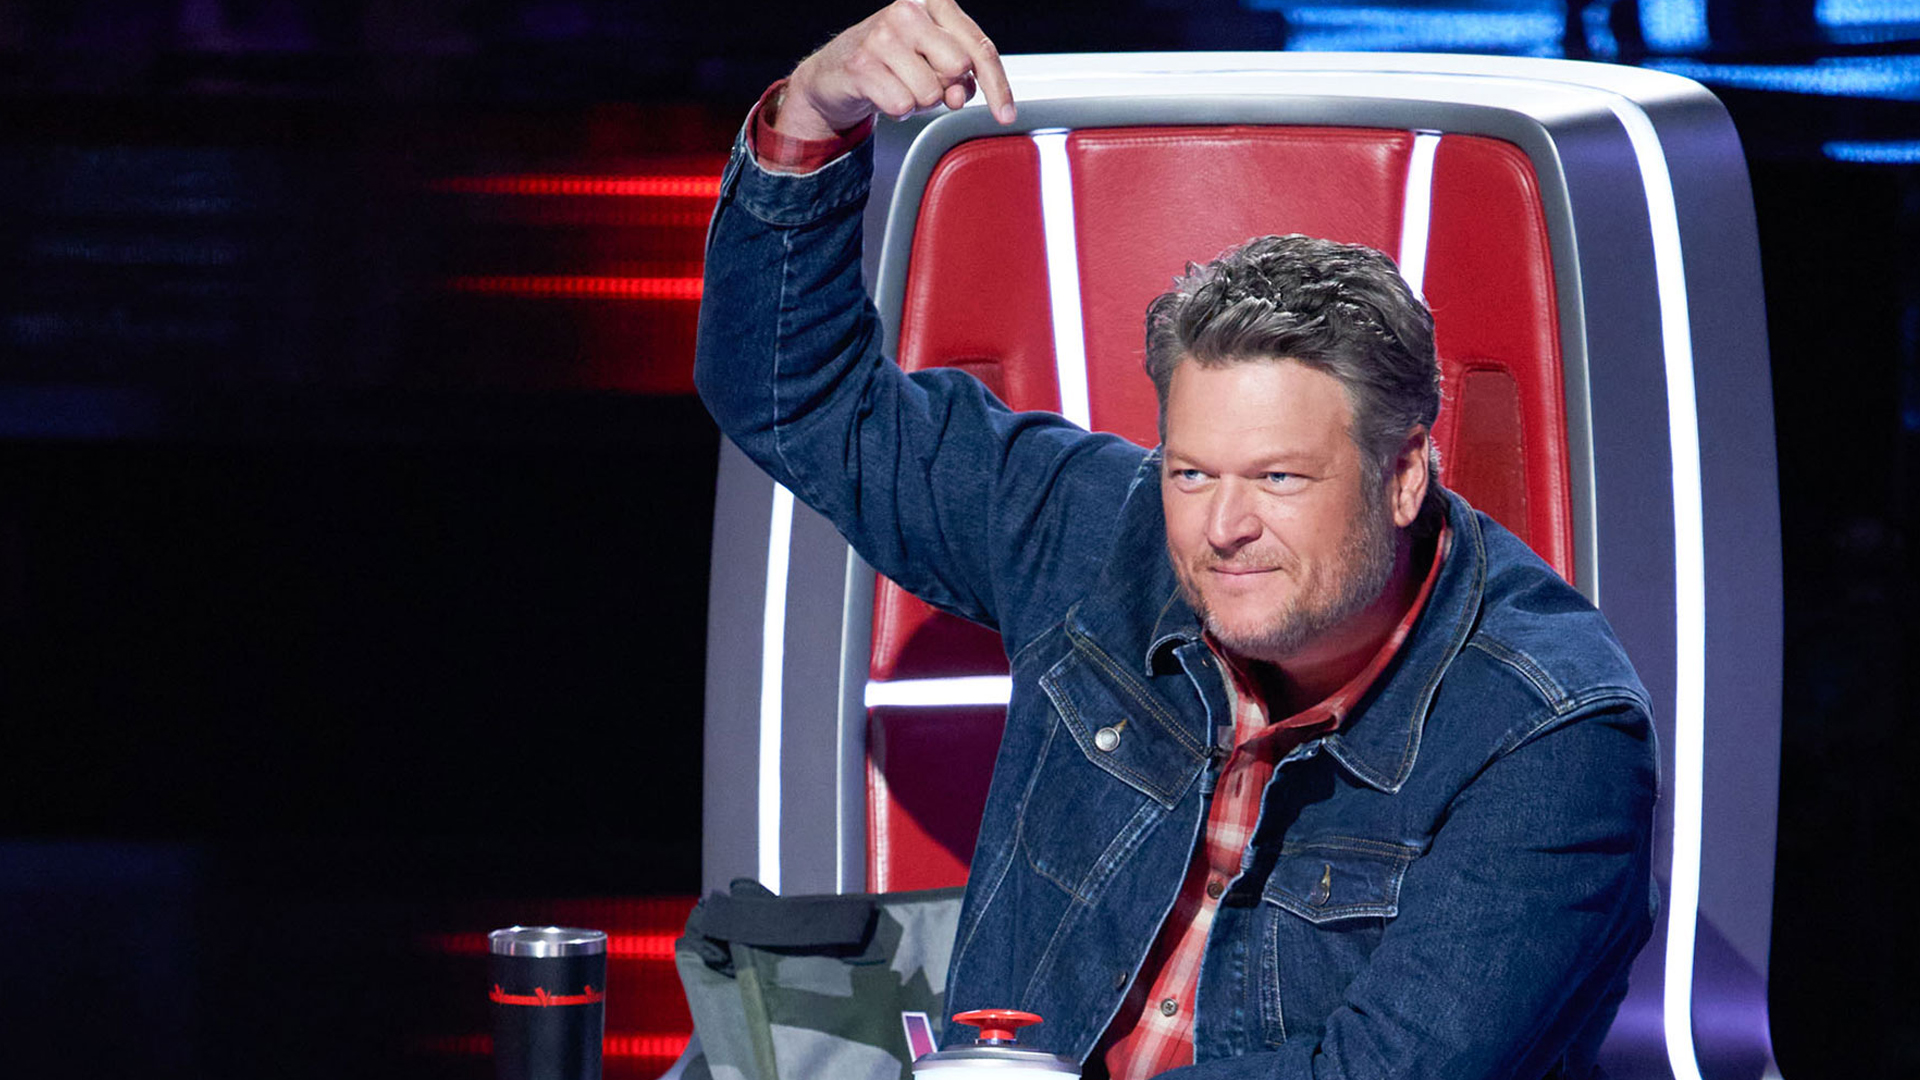 Why Is Blake Shelton Leaving The Voice After So Many Years?